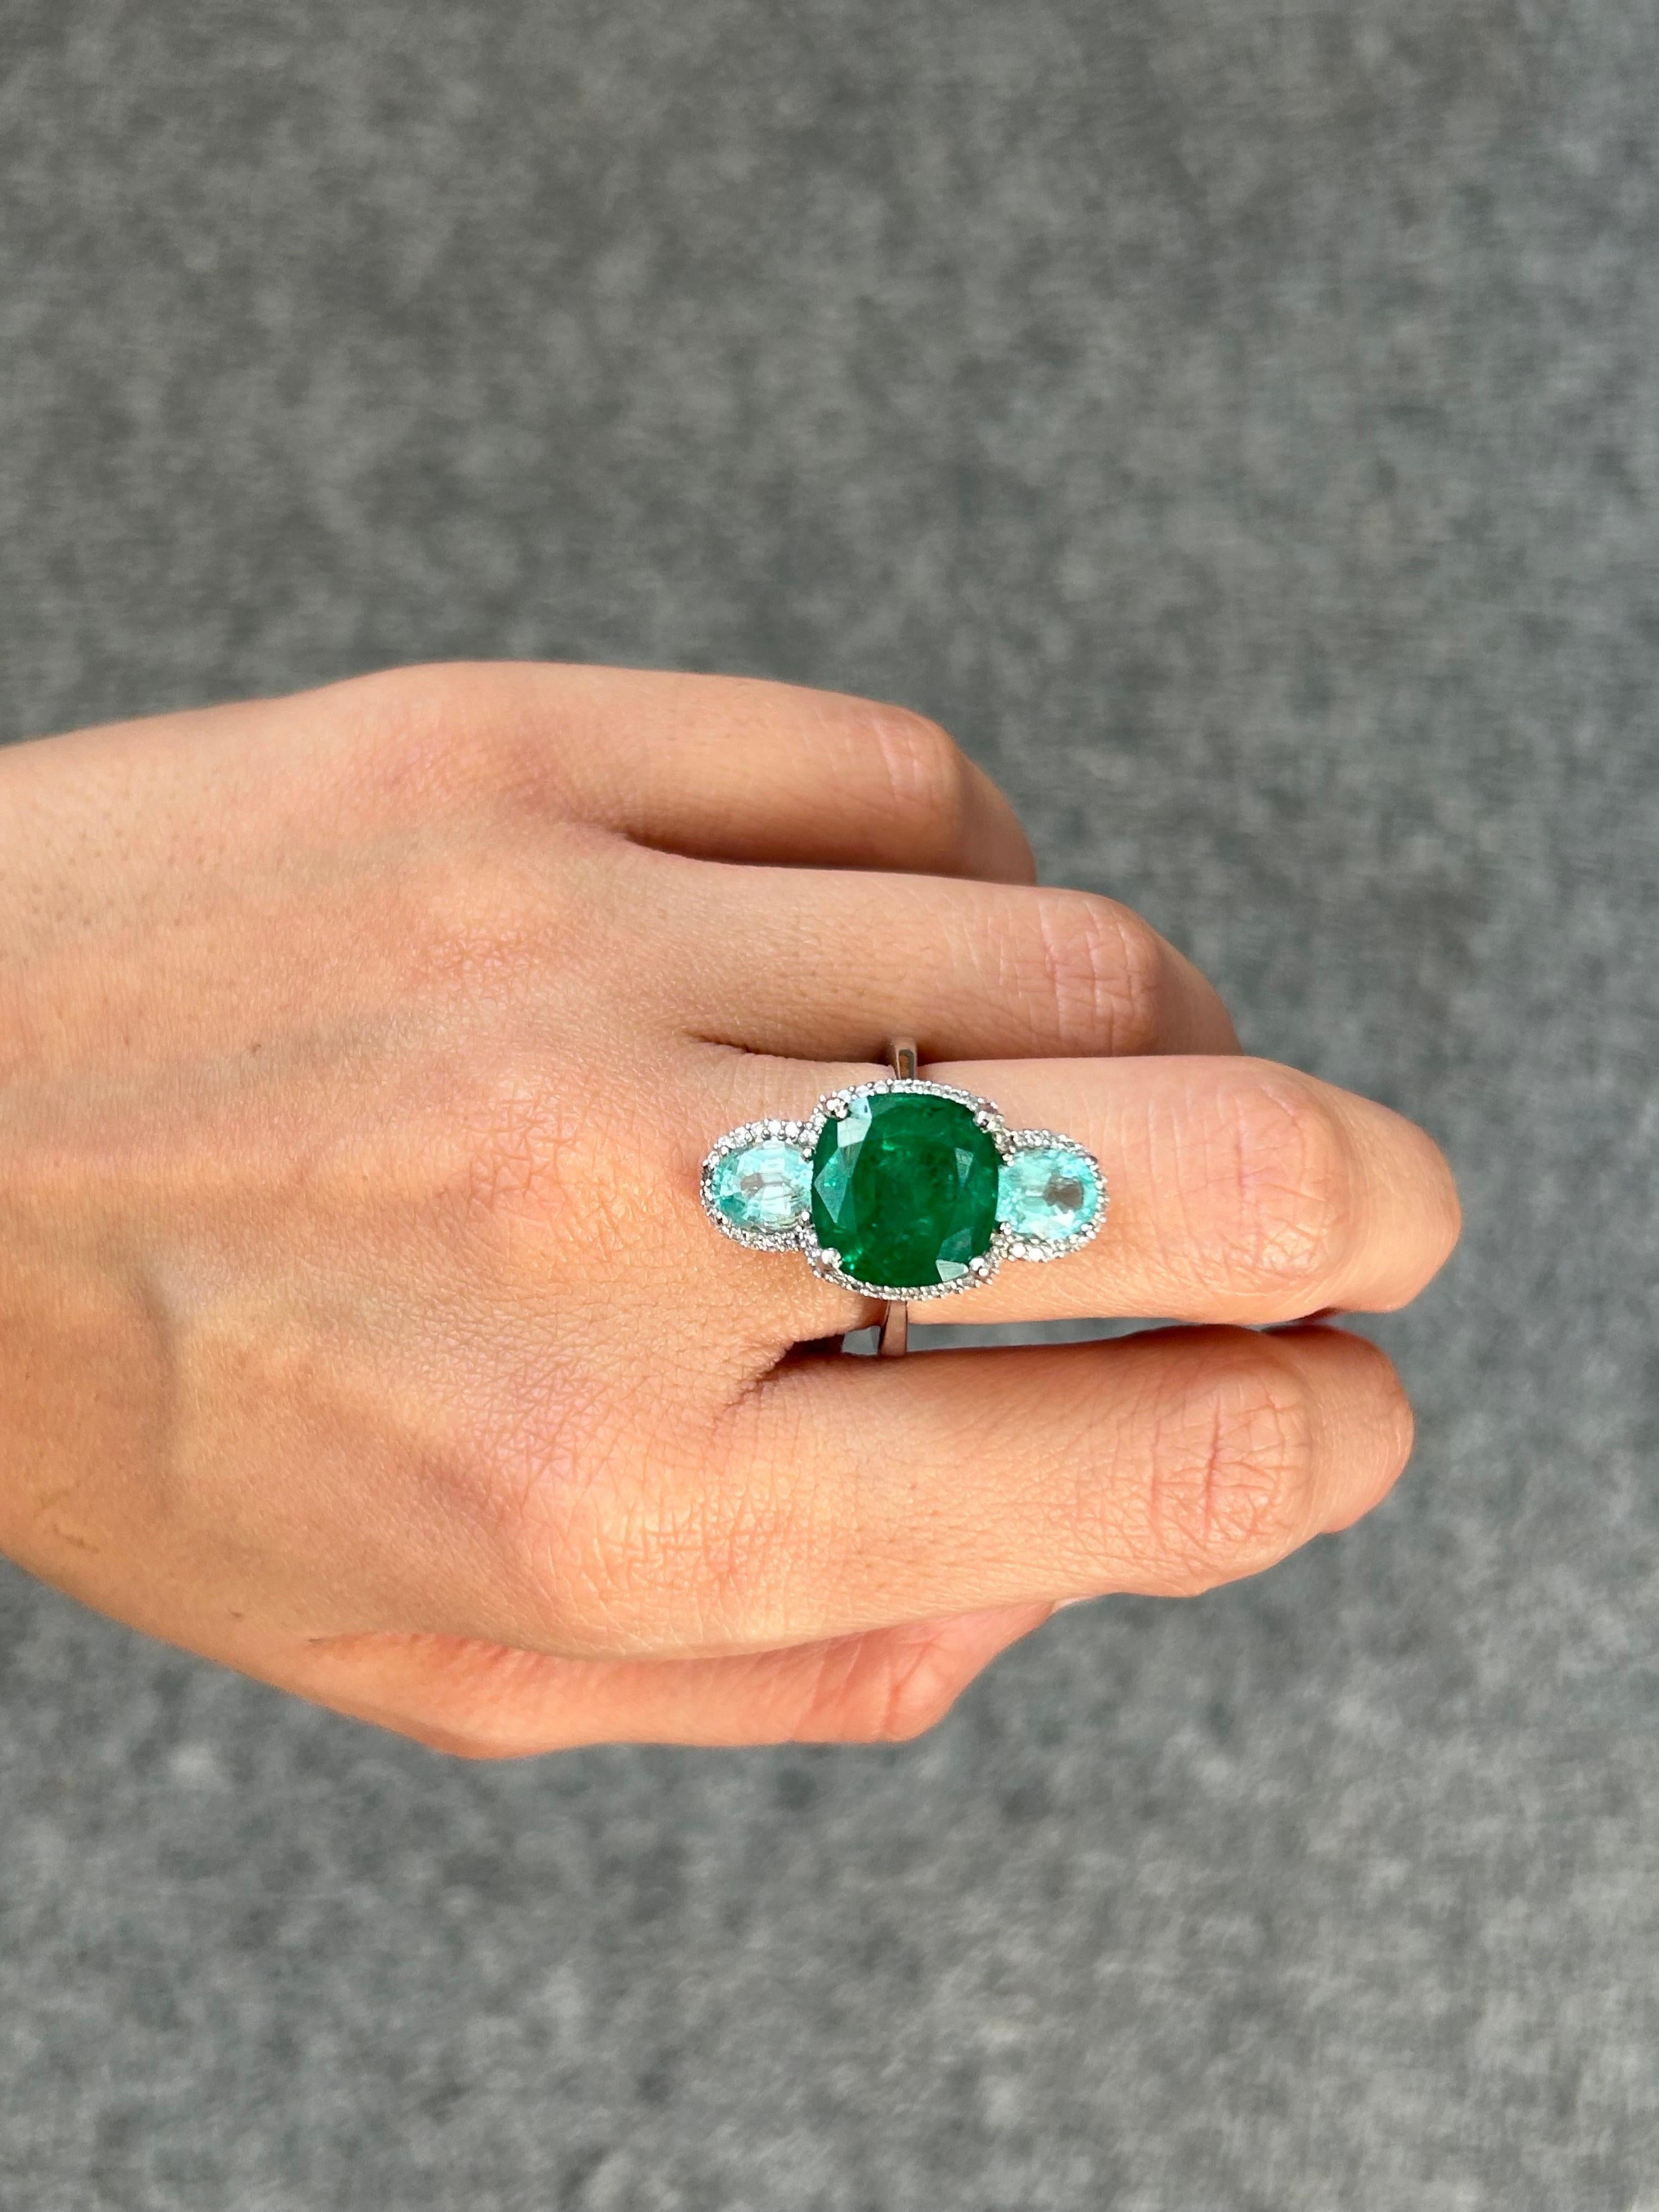 This custom-made 18k gold cocktail cluster ring features an exceptional display of craftsmanship and imaginative design, perfect for those who love the incredible color combination of high-quality green Emerald and aqua blue Paraiba. A cushion